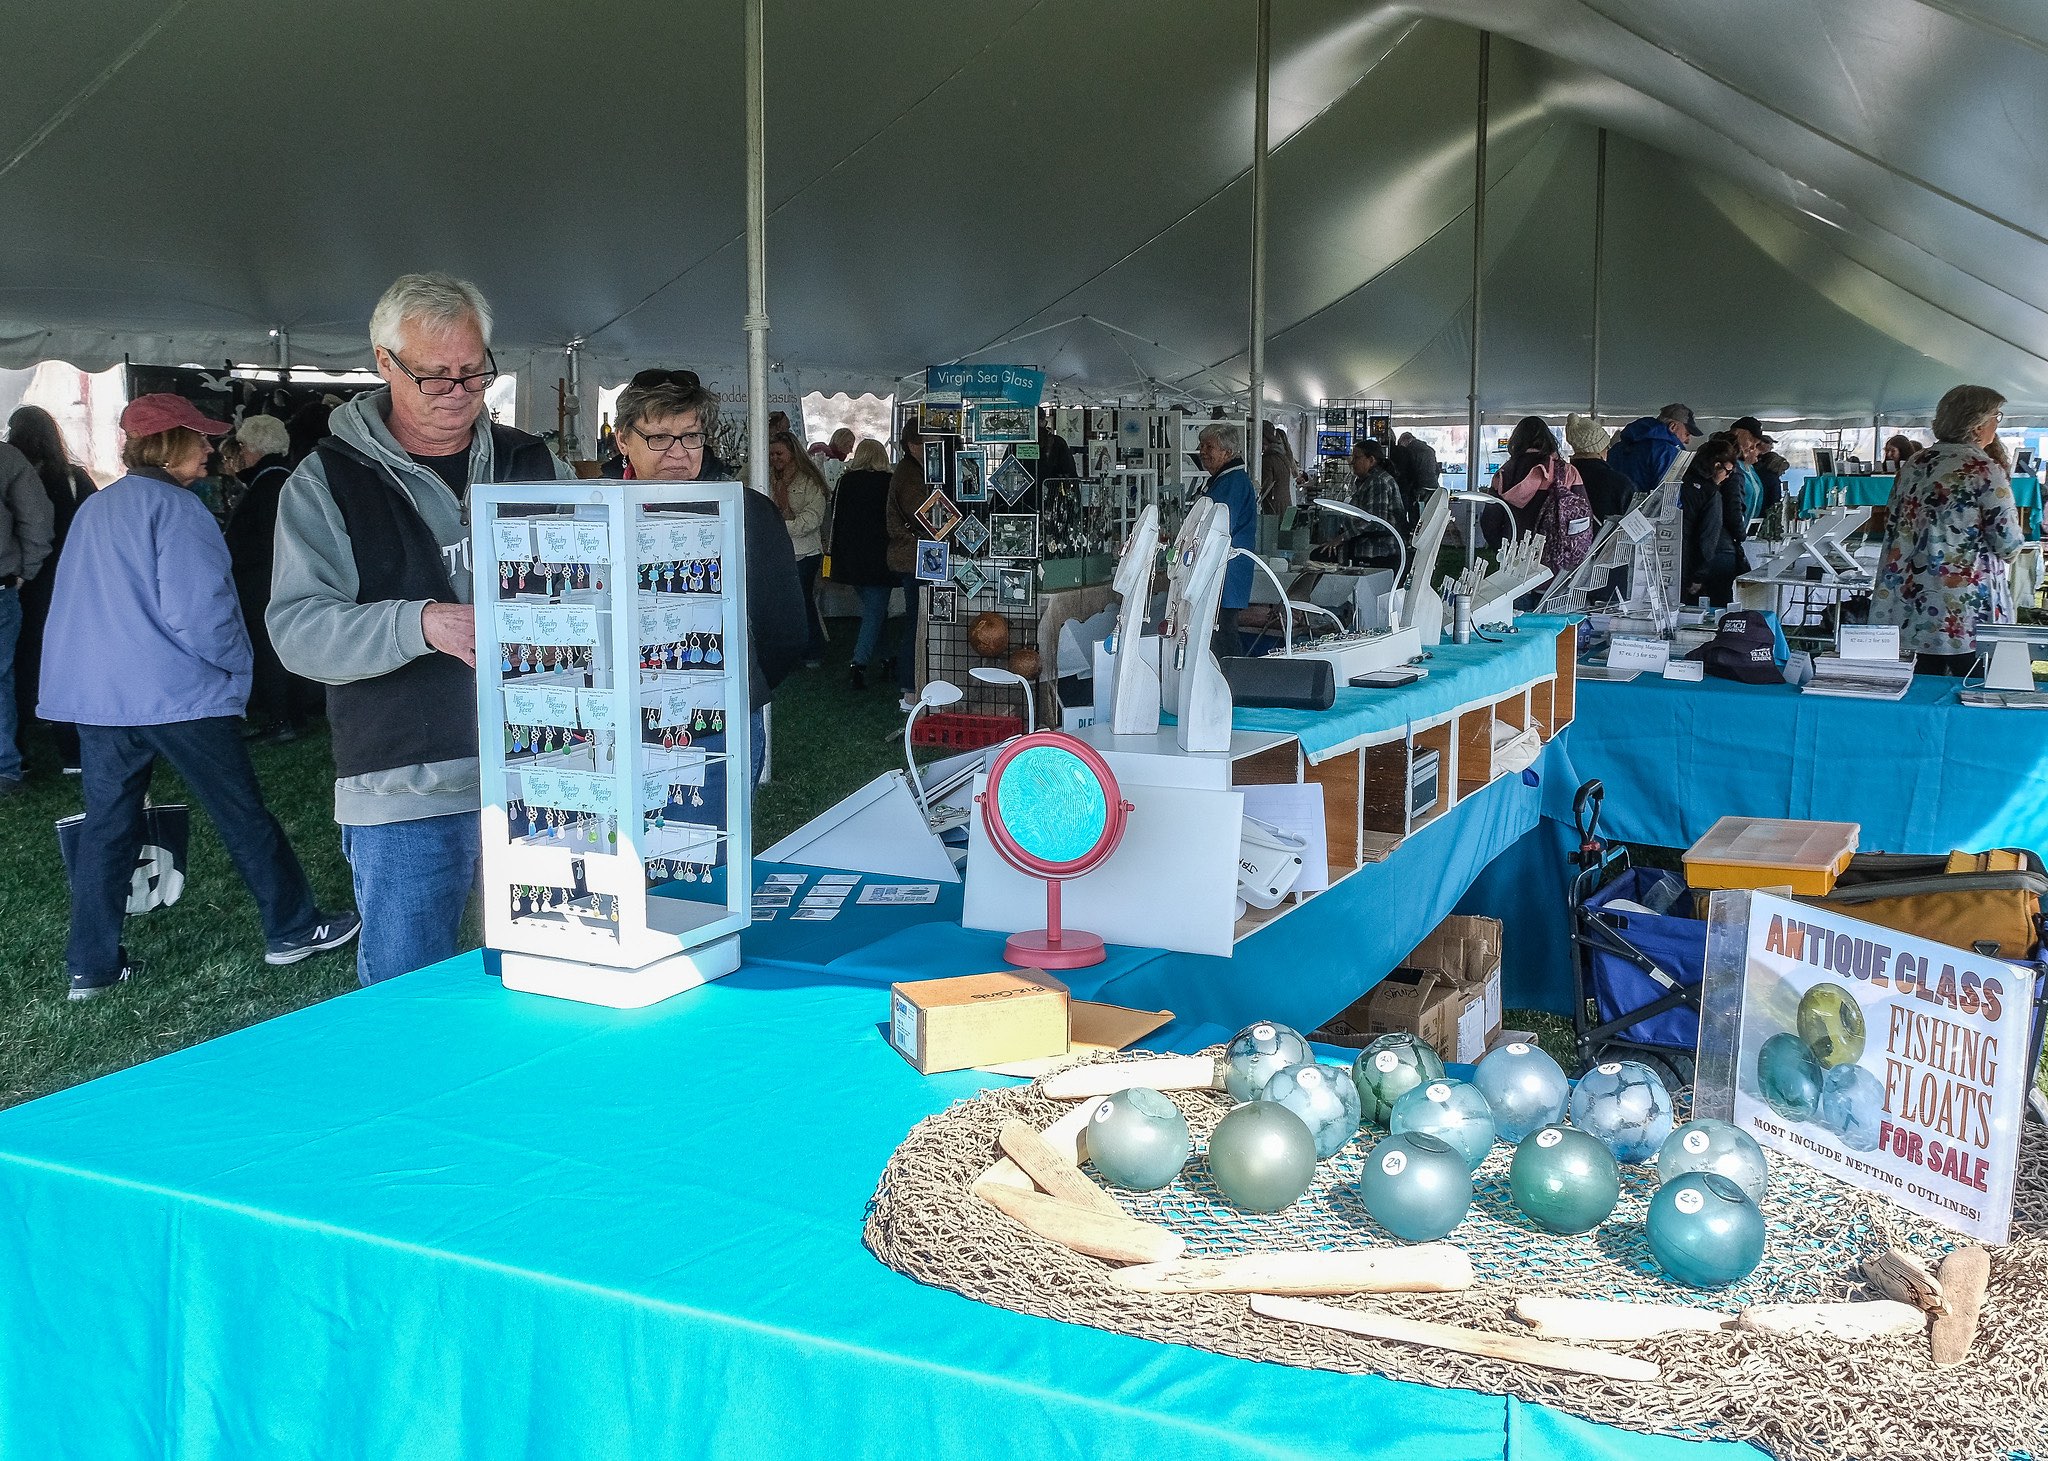 There are expected to be more than 85 exhibiting vendors at this edition of the Eastern Shore Sea Glass & Coastal Arts Festival. (Photo by George Sass)